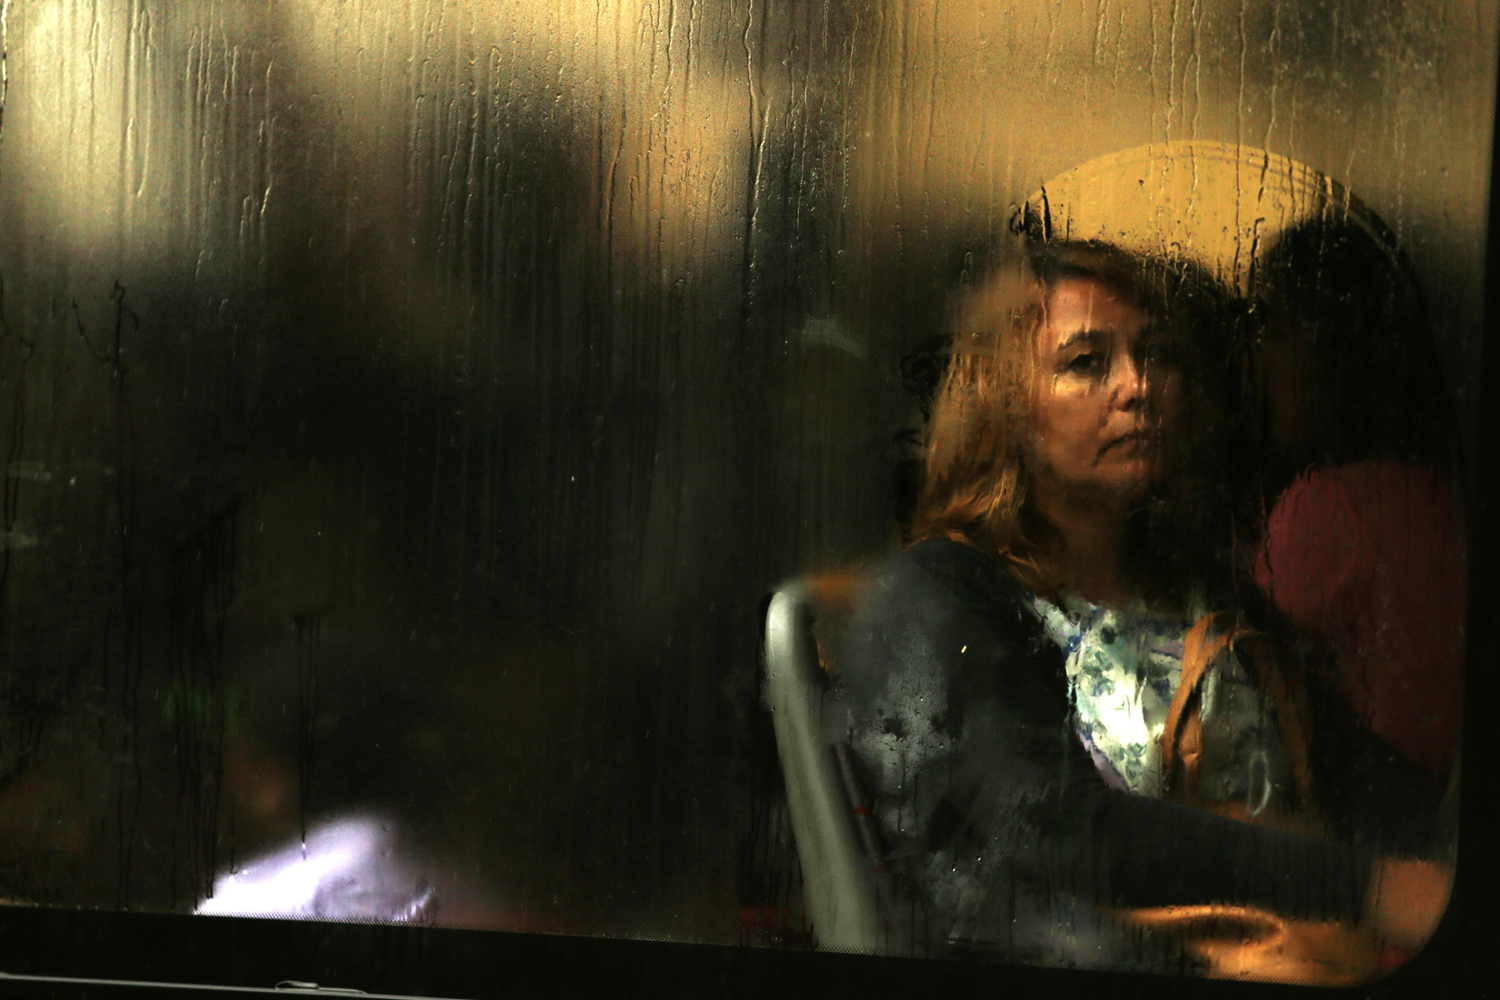 Sept. 10, 2014. A woman looks through the window of a packed bus departing with commuters during a partial strike by Lisbon's subway workers, in Lisbon. The subway staff walked off the job during the morning rush hour in a protest against pay cuts and the company's possible privatization. The strike brought misery for commuters who faced long queues for buses in the rain.